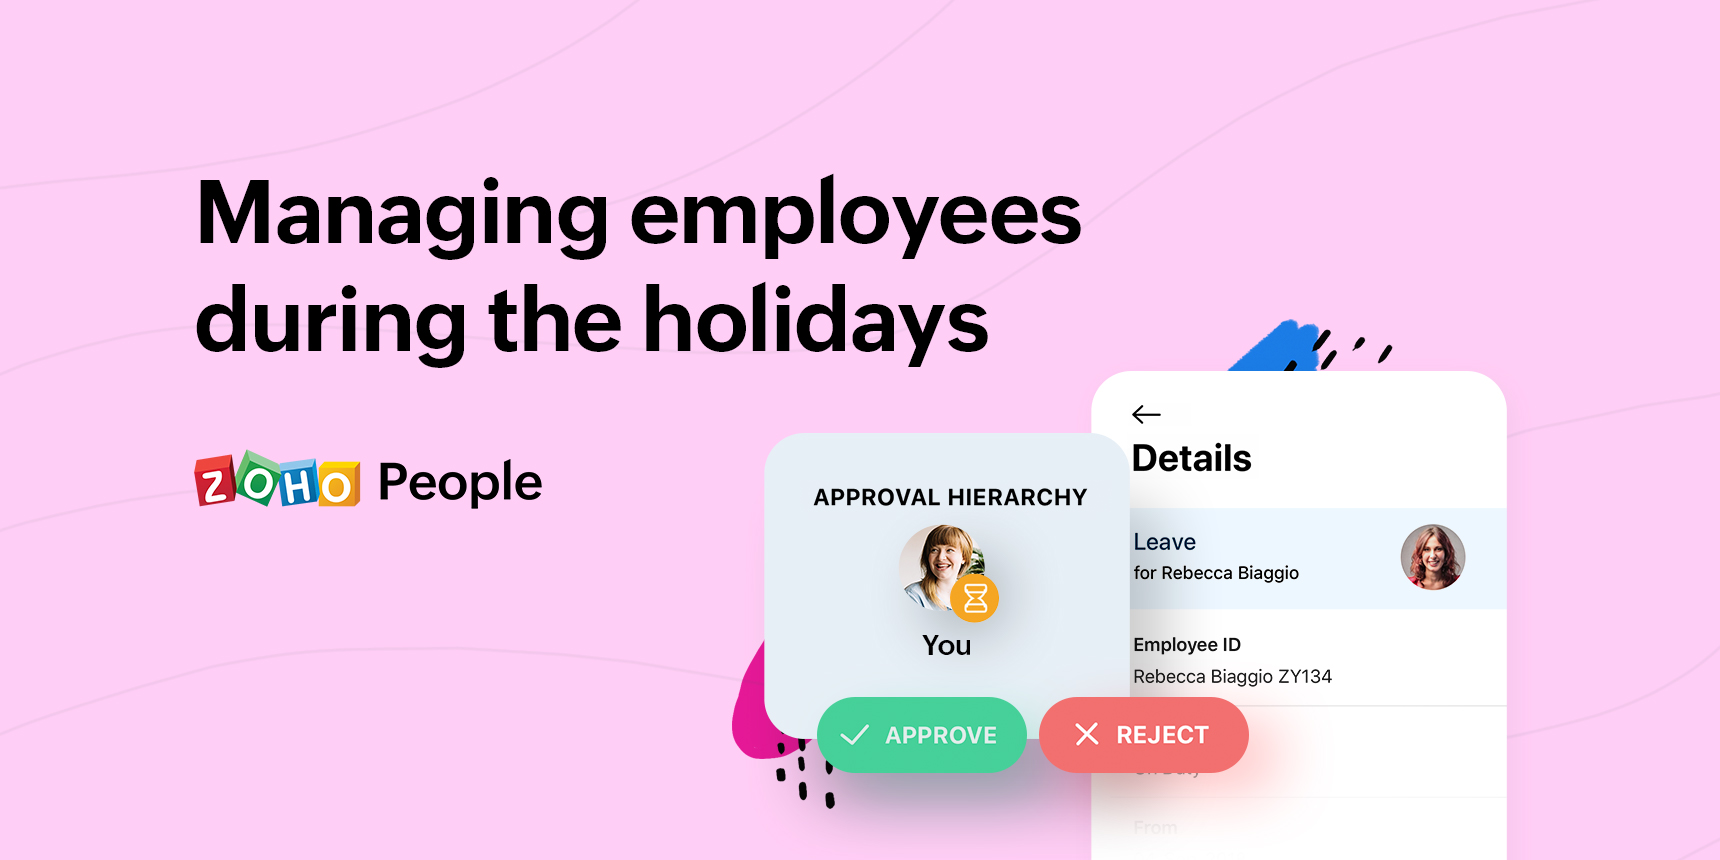 Managing employees during the holidays